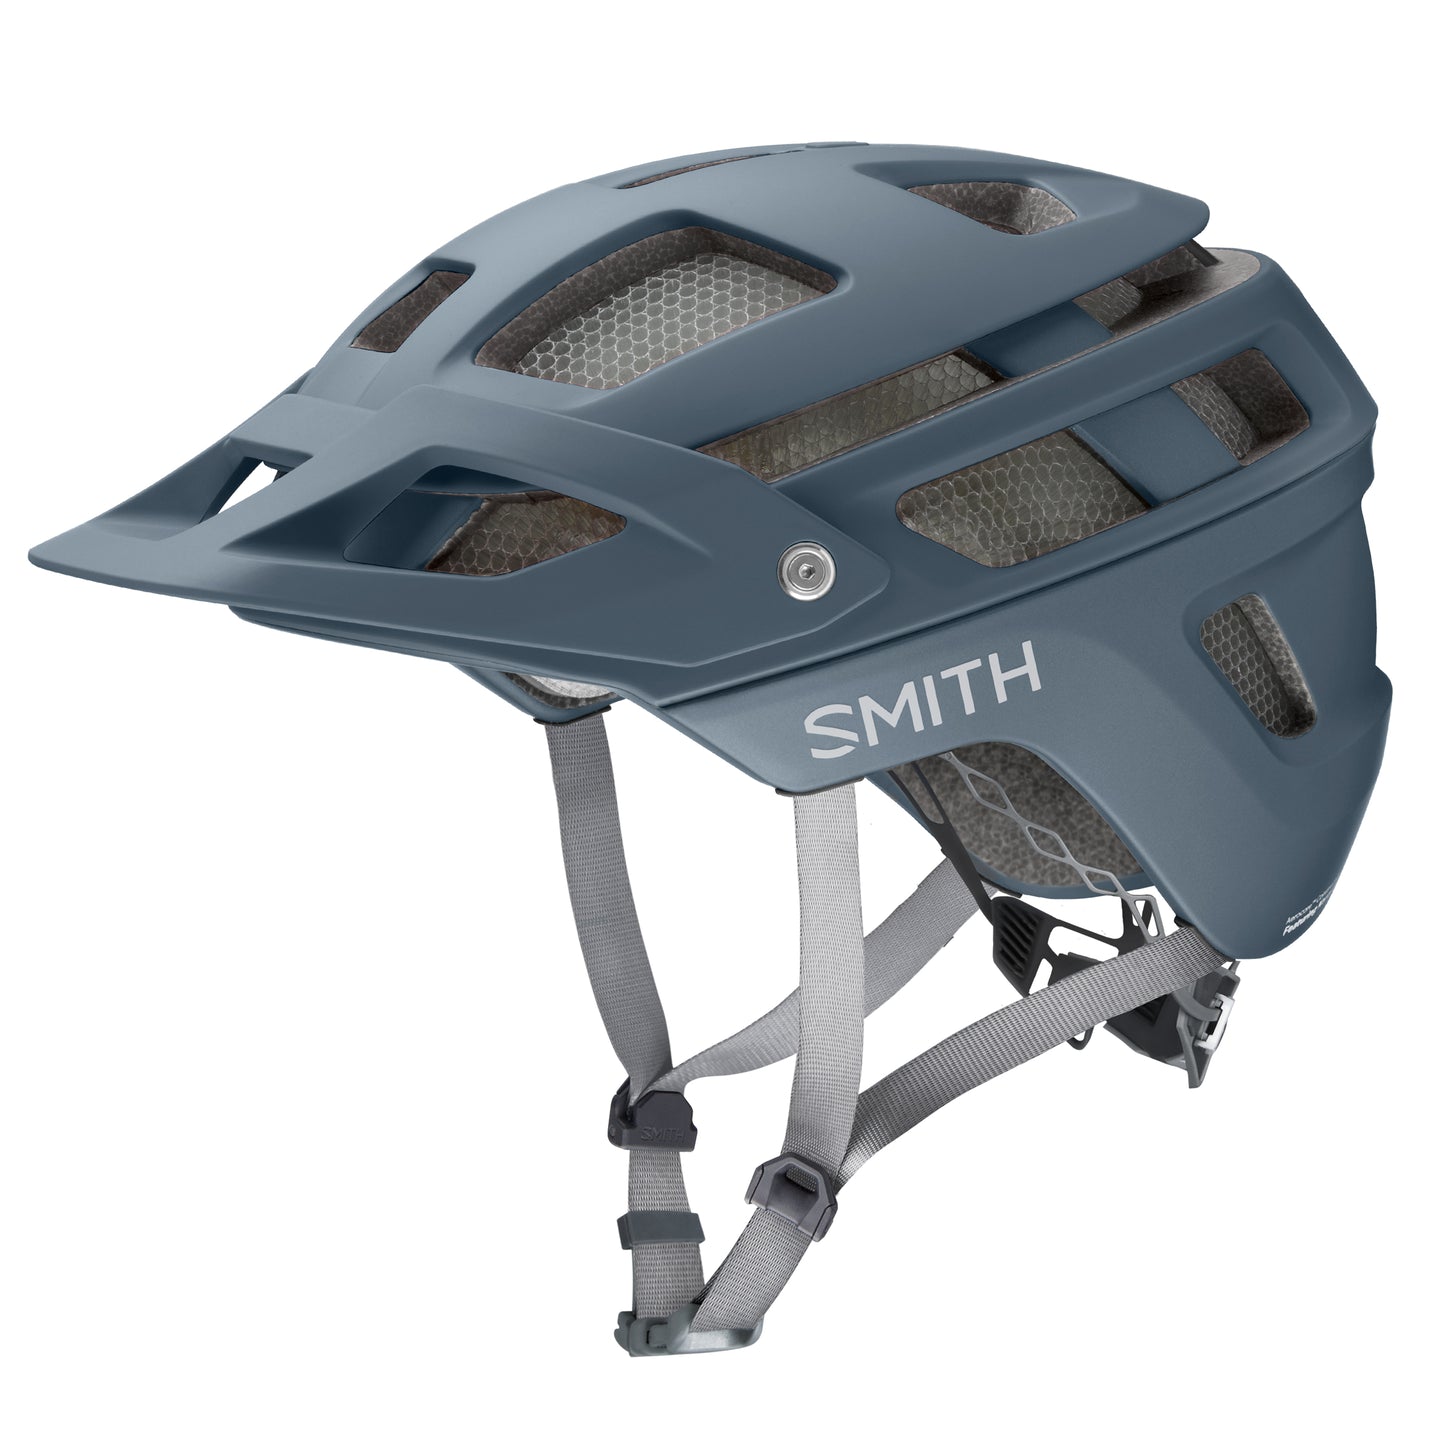 The Smith Forefront Mtb Helmet